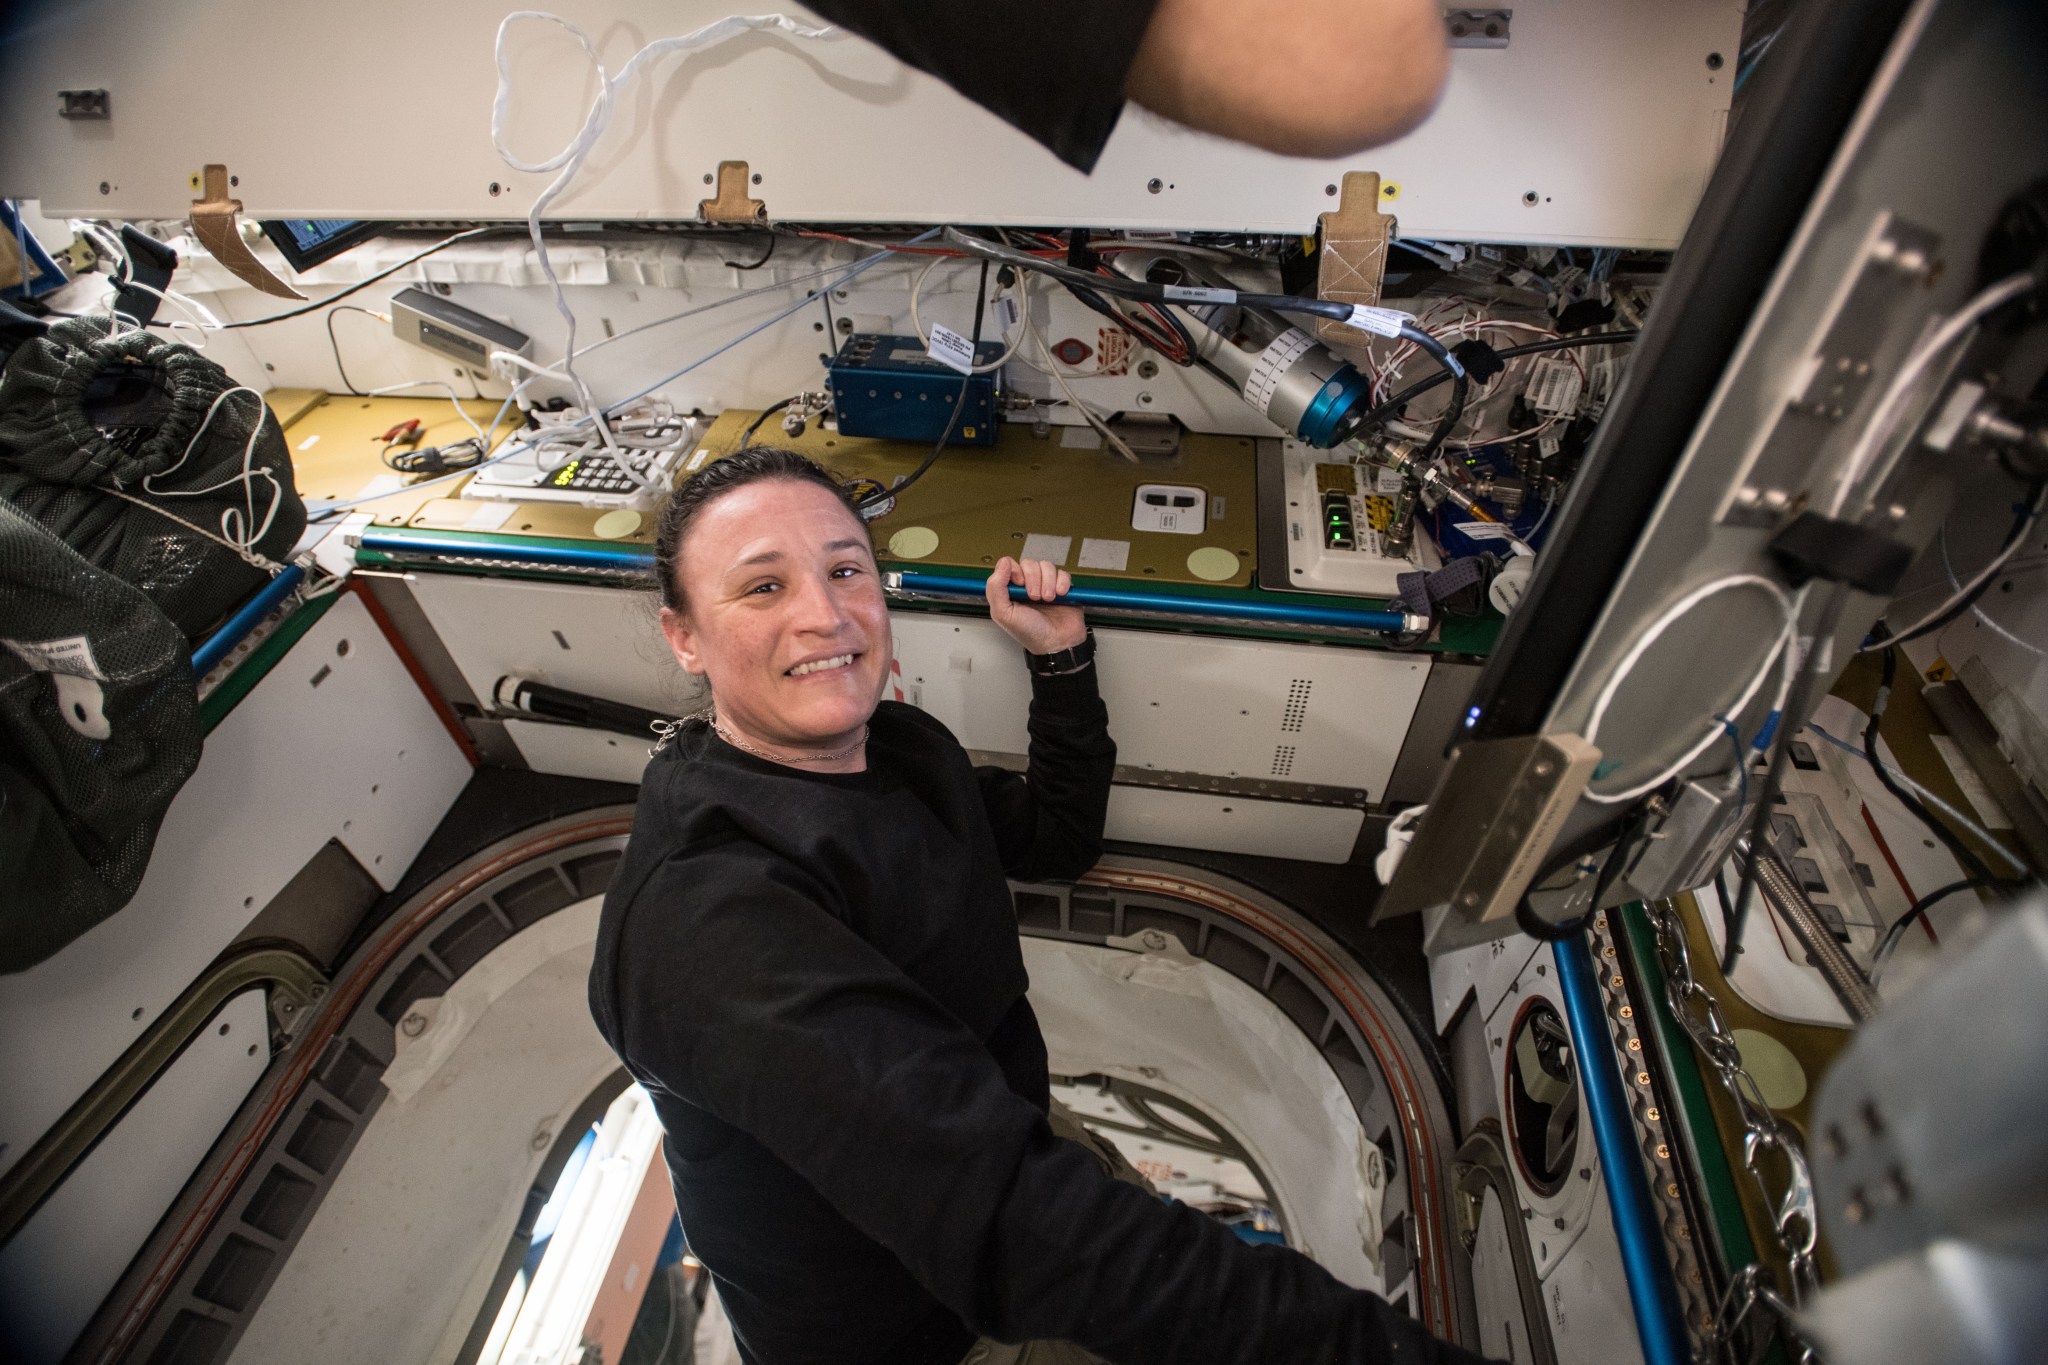 NASA astronaut Serena Auñón-Chancellor is pictured here during an Hydrogen Sensor Oxygen Generation System Remove and Replace.